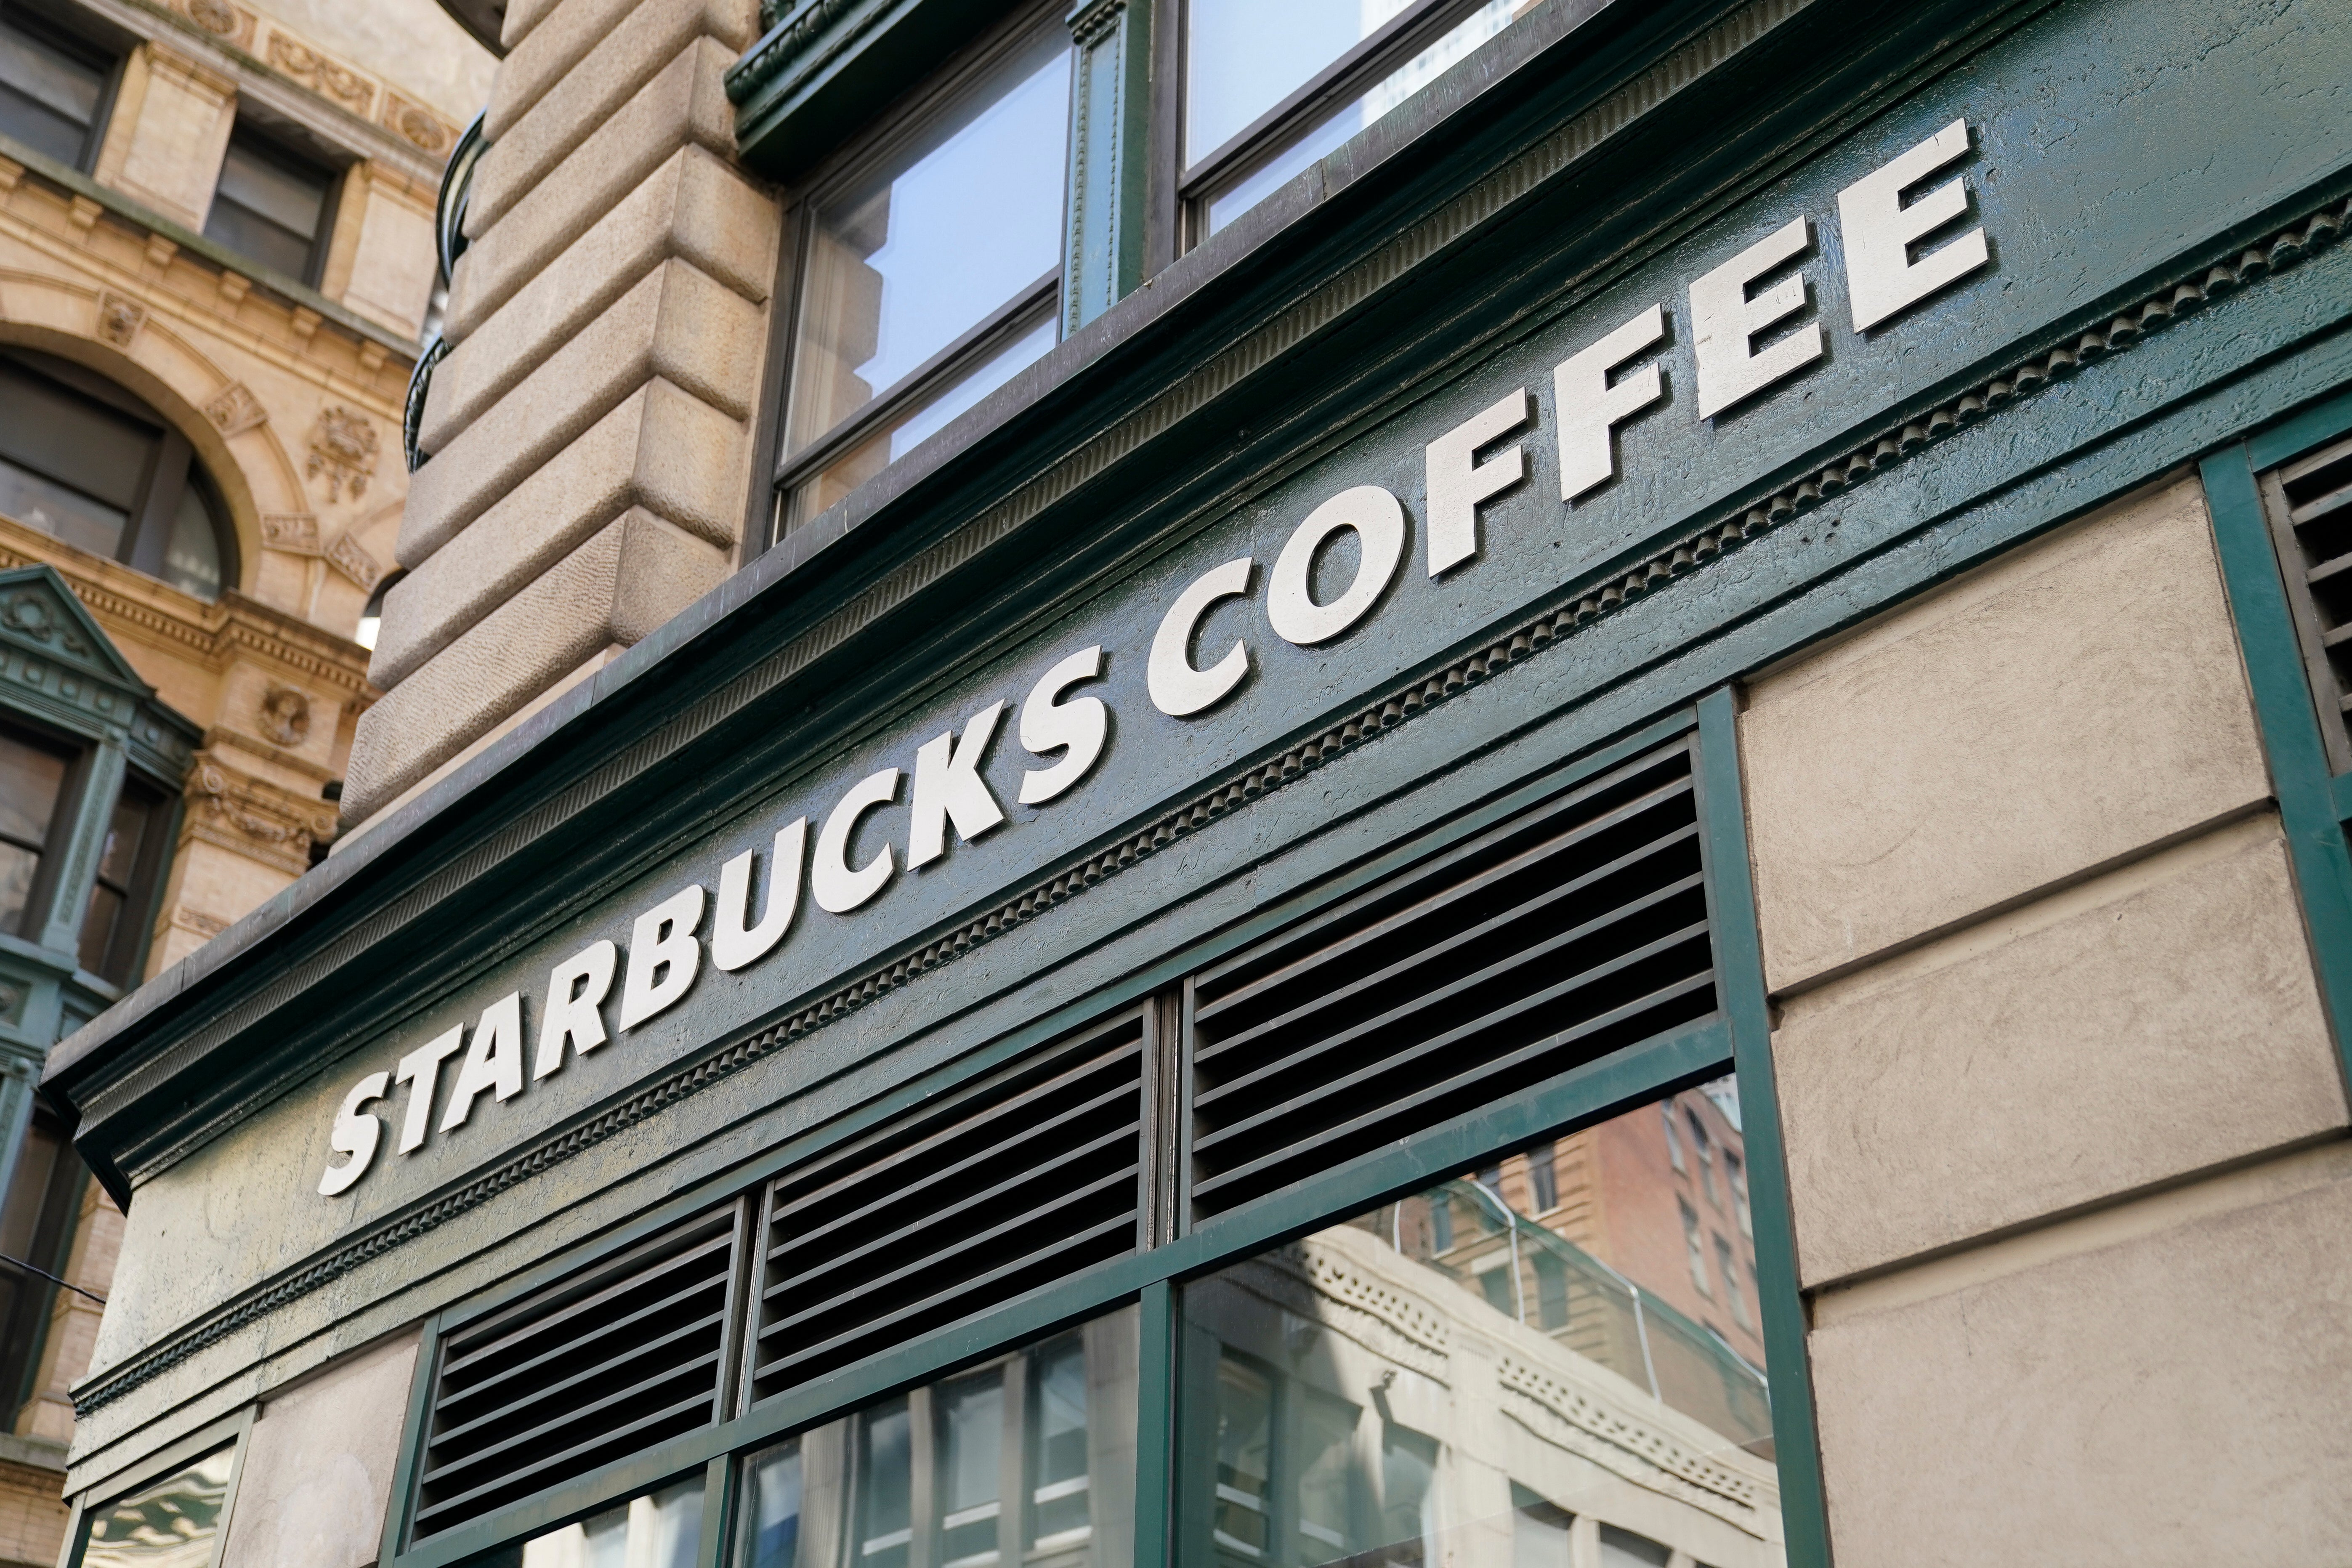 Noticeable price increases at Starbucks over the past few years have led customers, from teenagers to city workers, to rethink their need to buy a morning treat